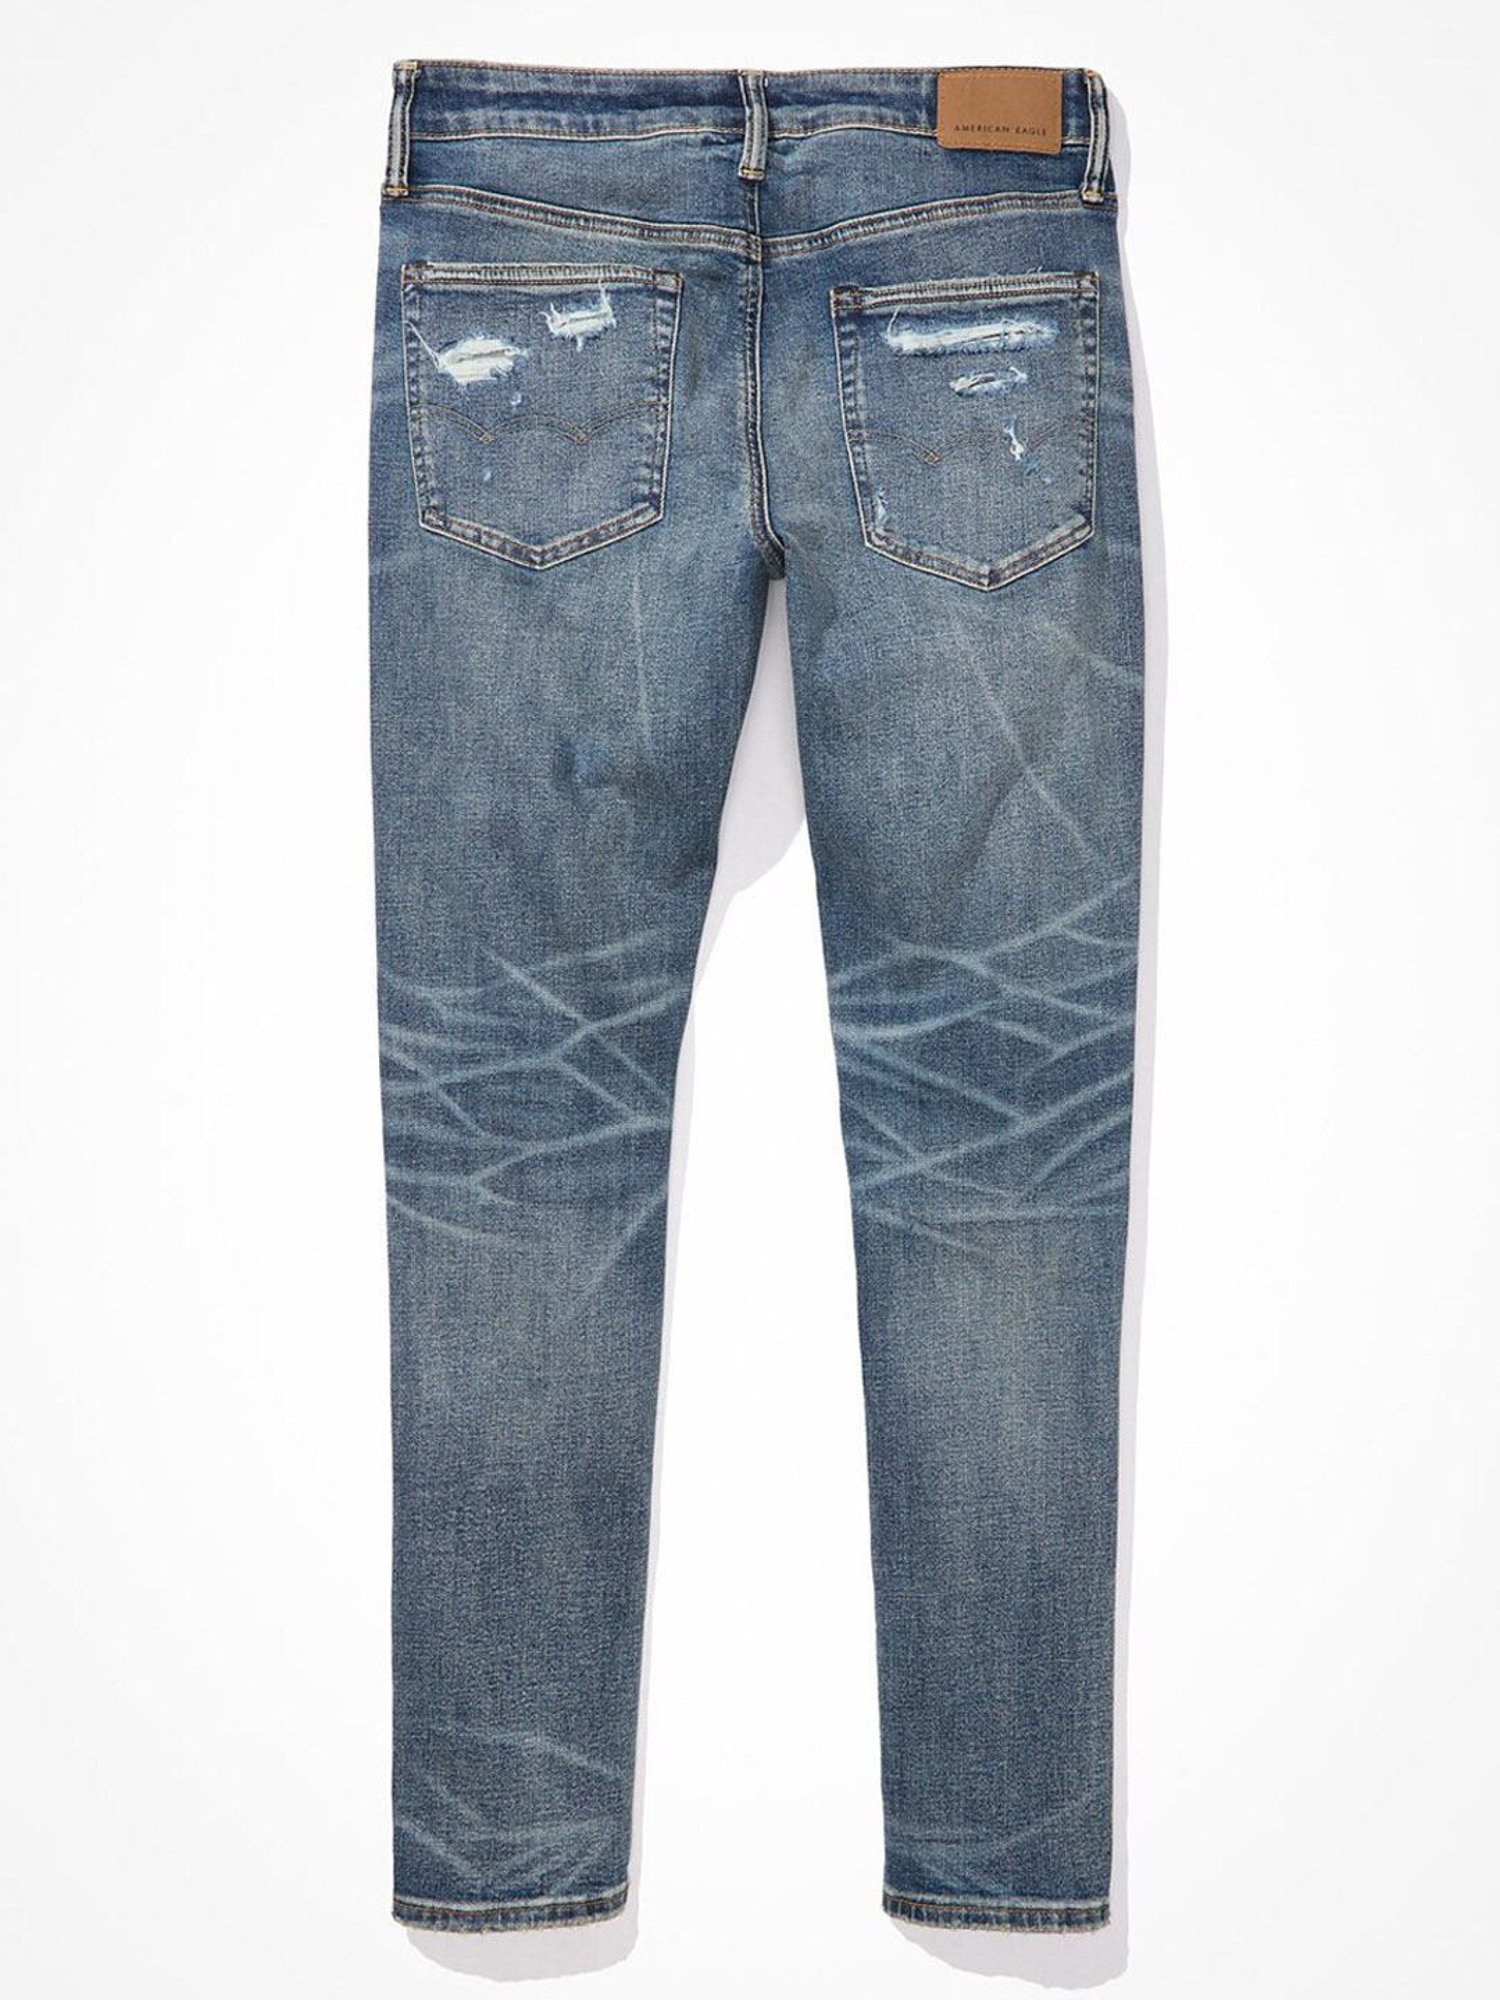 American Eagle Outfitters Blue Skinny Fit Distressed Jeans